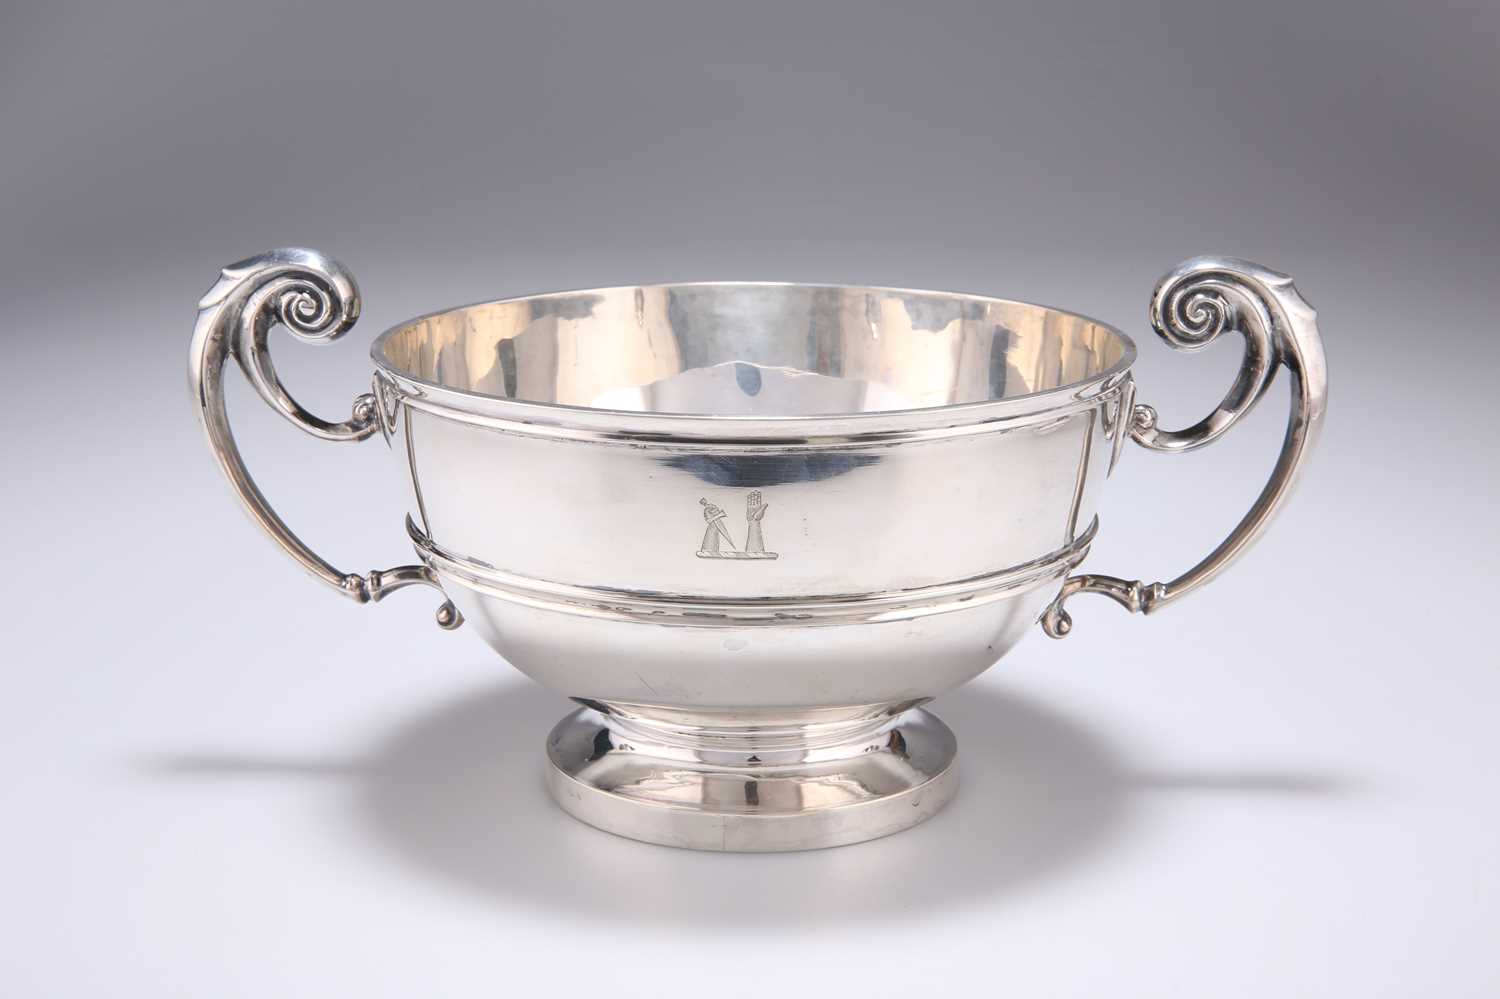 A LATE VICTORIAN SILVER TWIN-HANDLED PEDESTAL BOWL